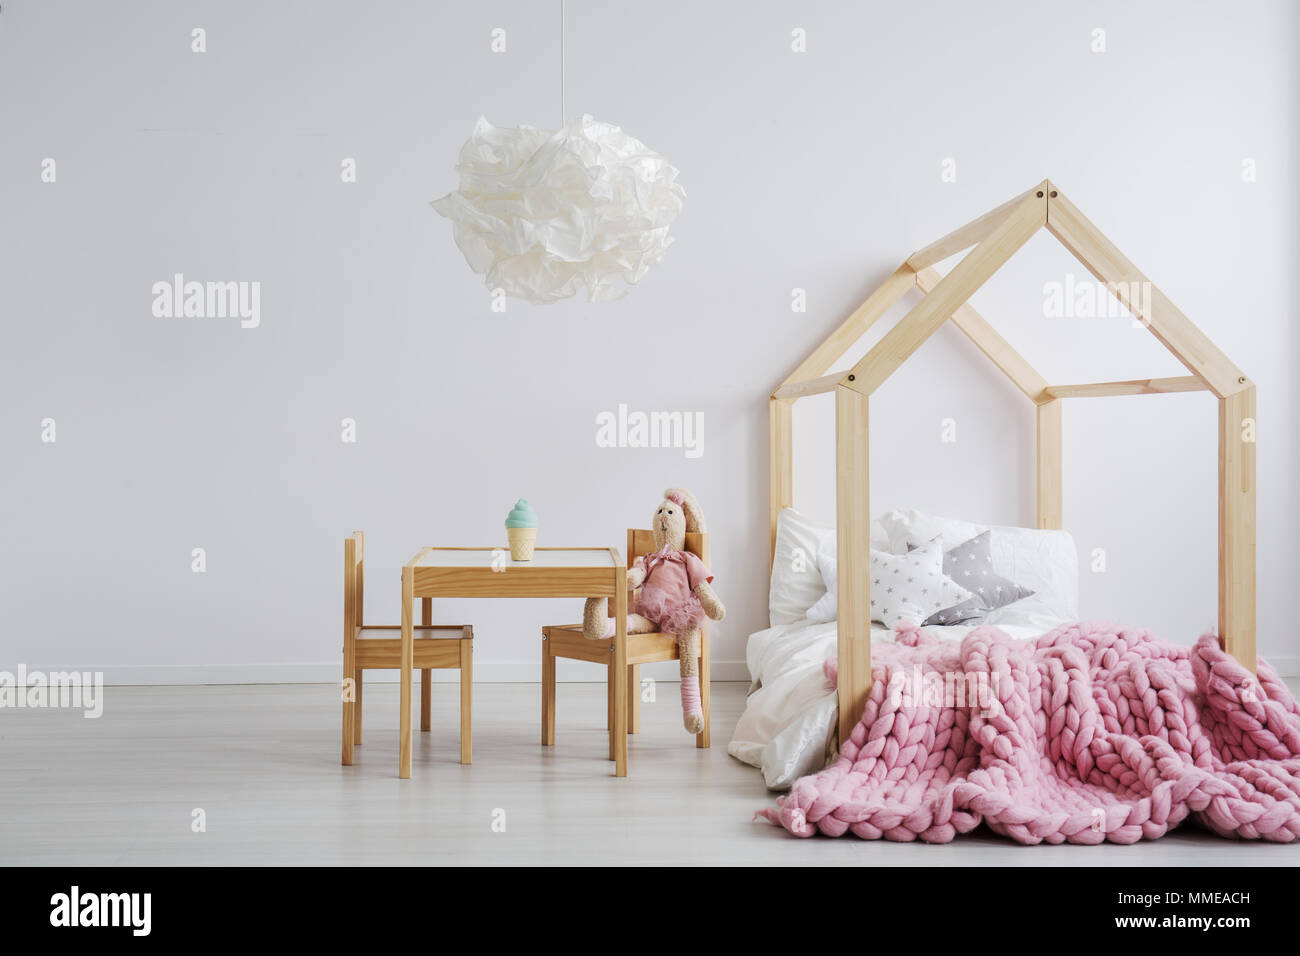 Simple but cute wooden furniture for girl's room Stock Photo